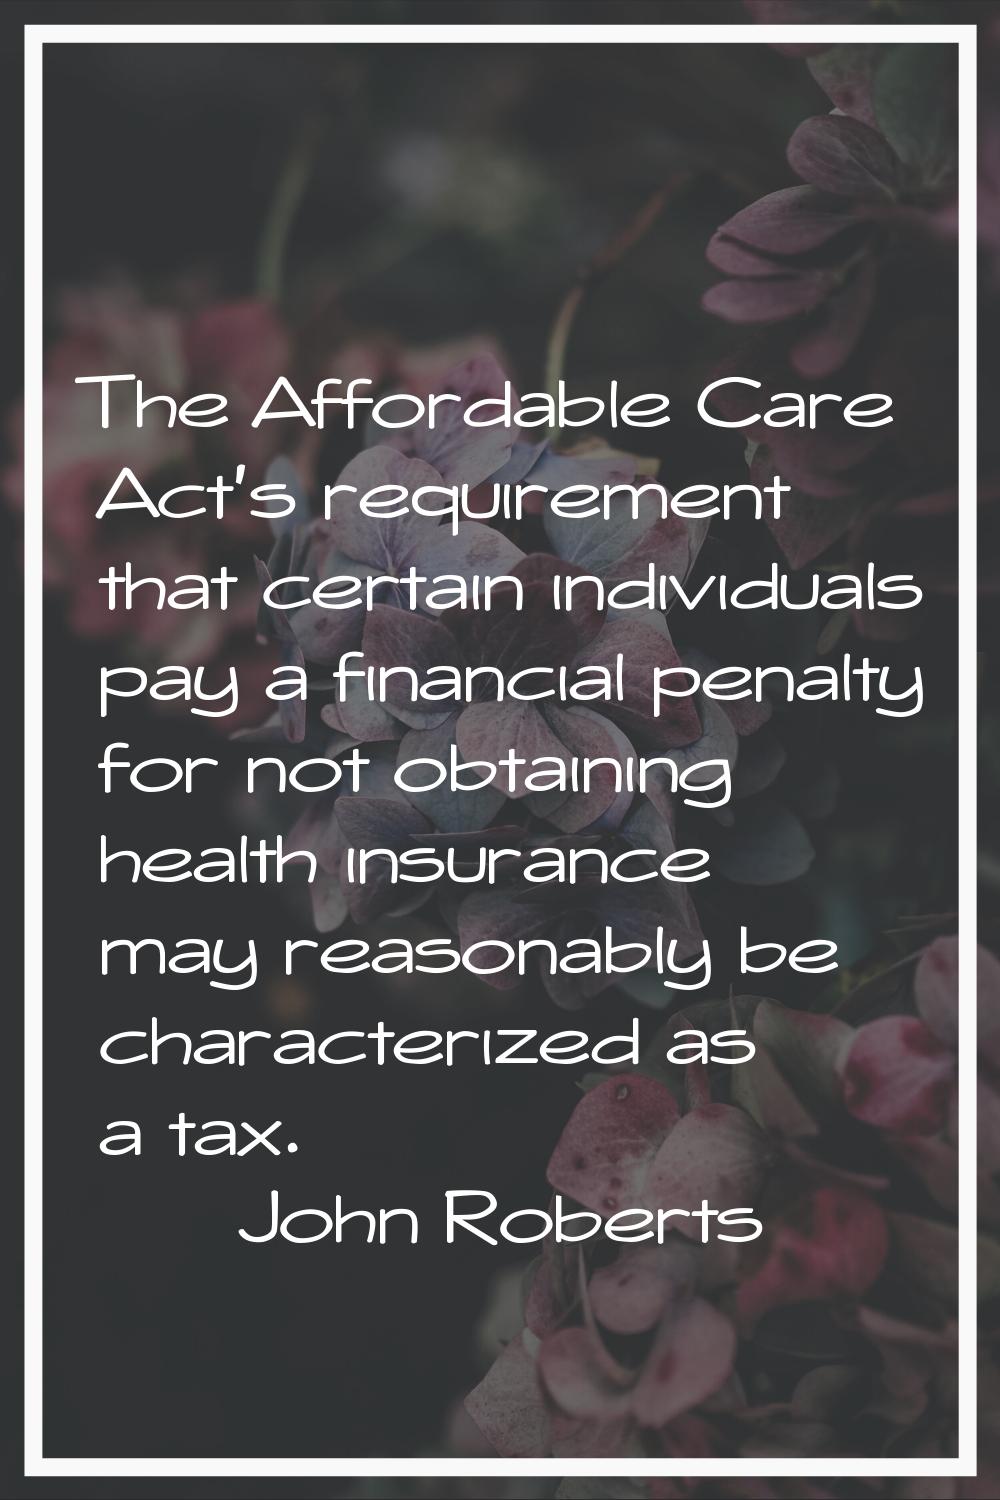 The Affordable Care Act's requirement that certain individuals pay a financial penalty for not obta